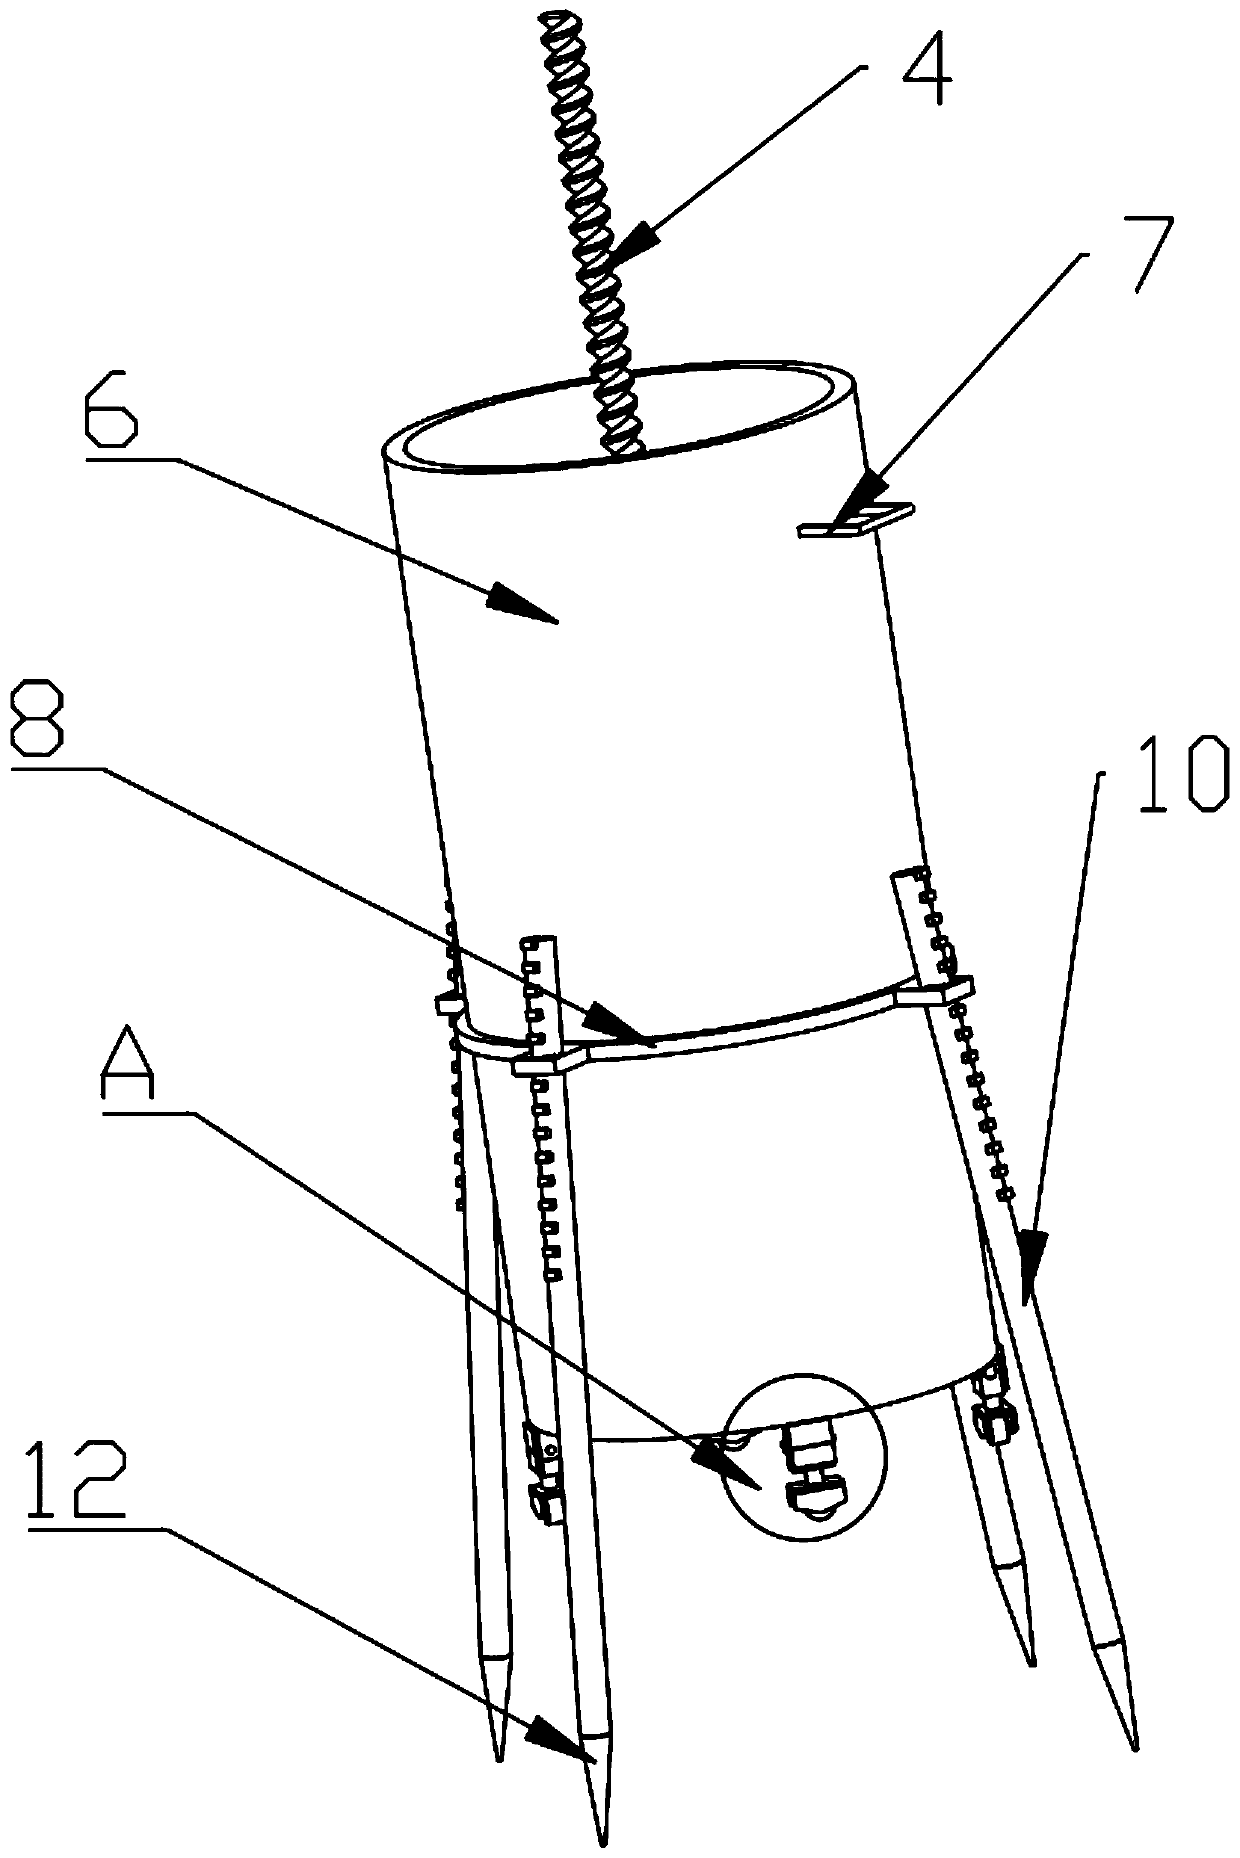 Soil loosening device suitable for planting trees in special-shaped mountain landforms